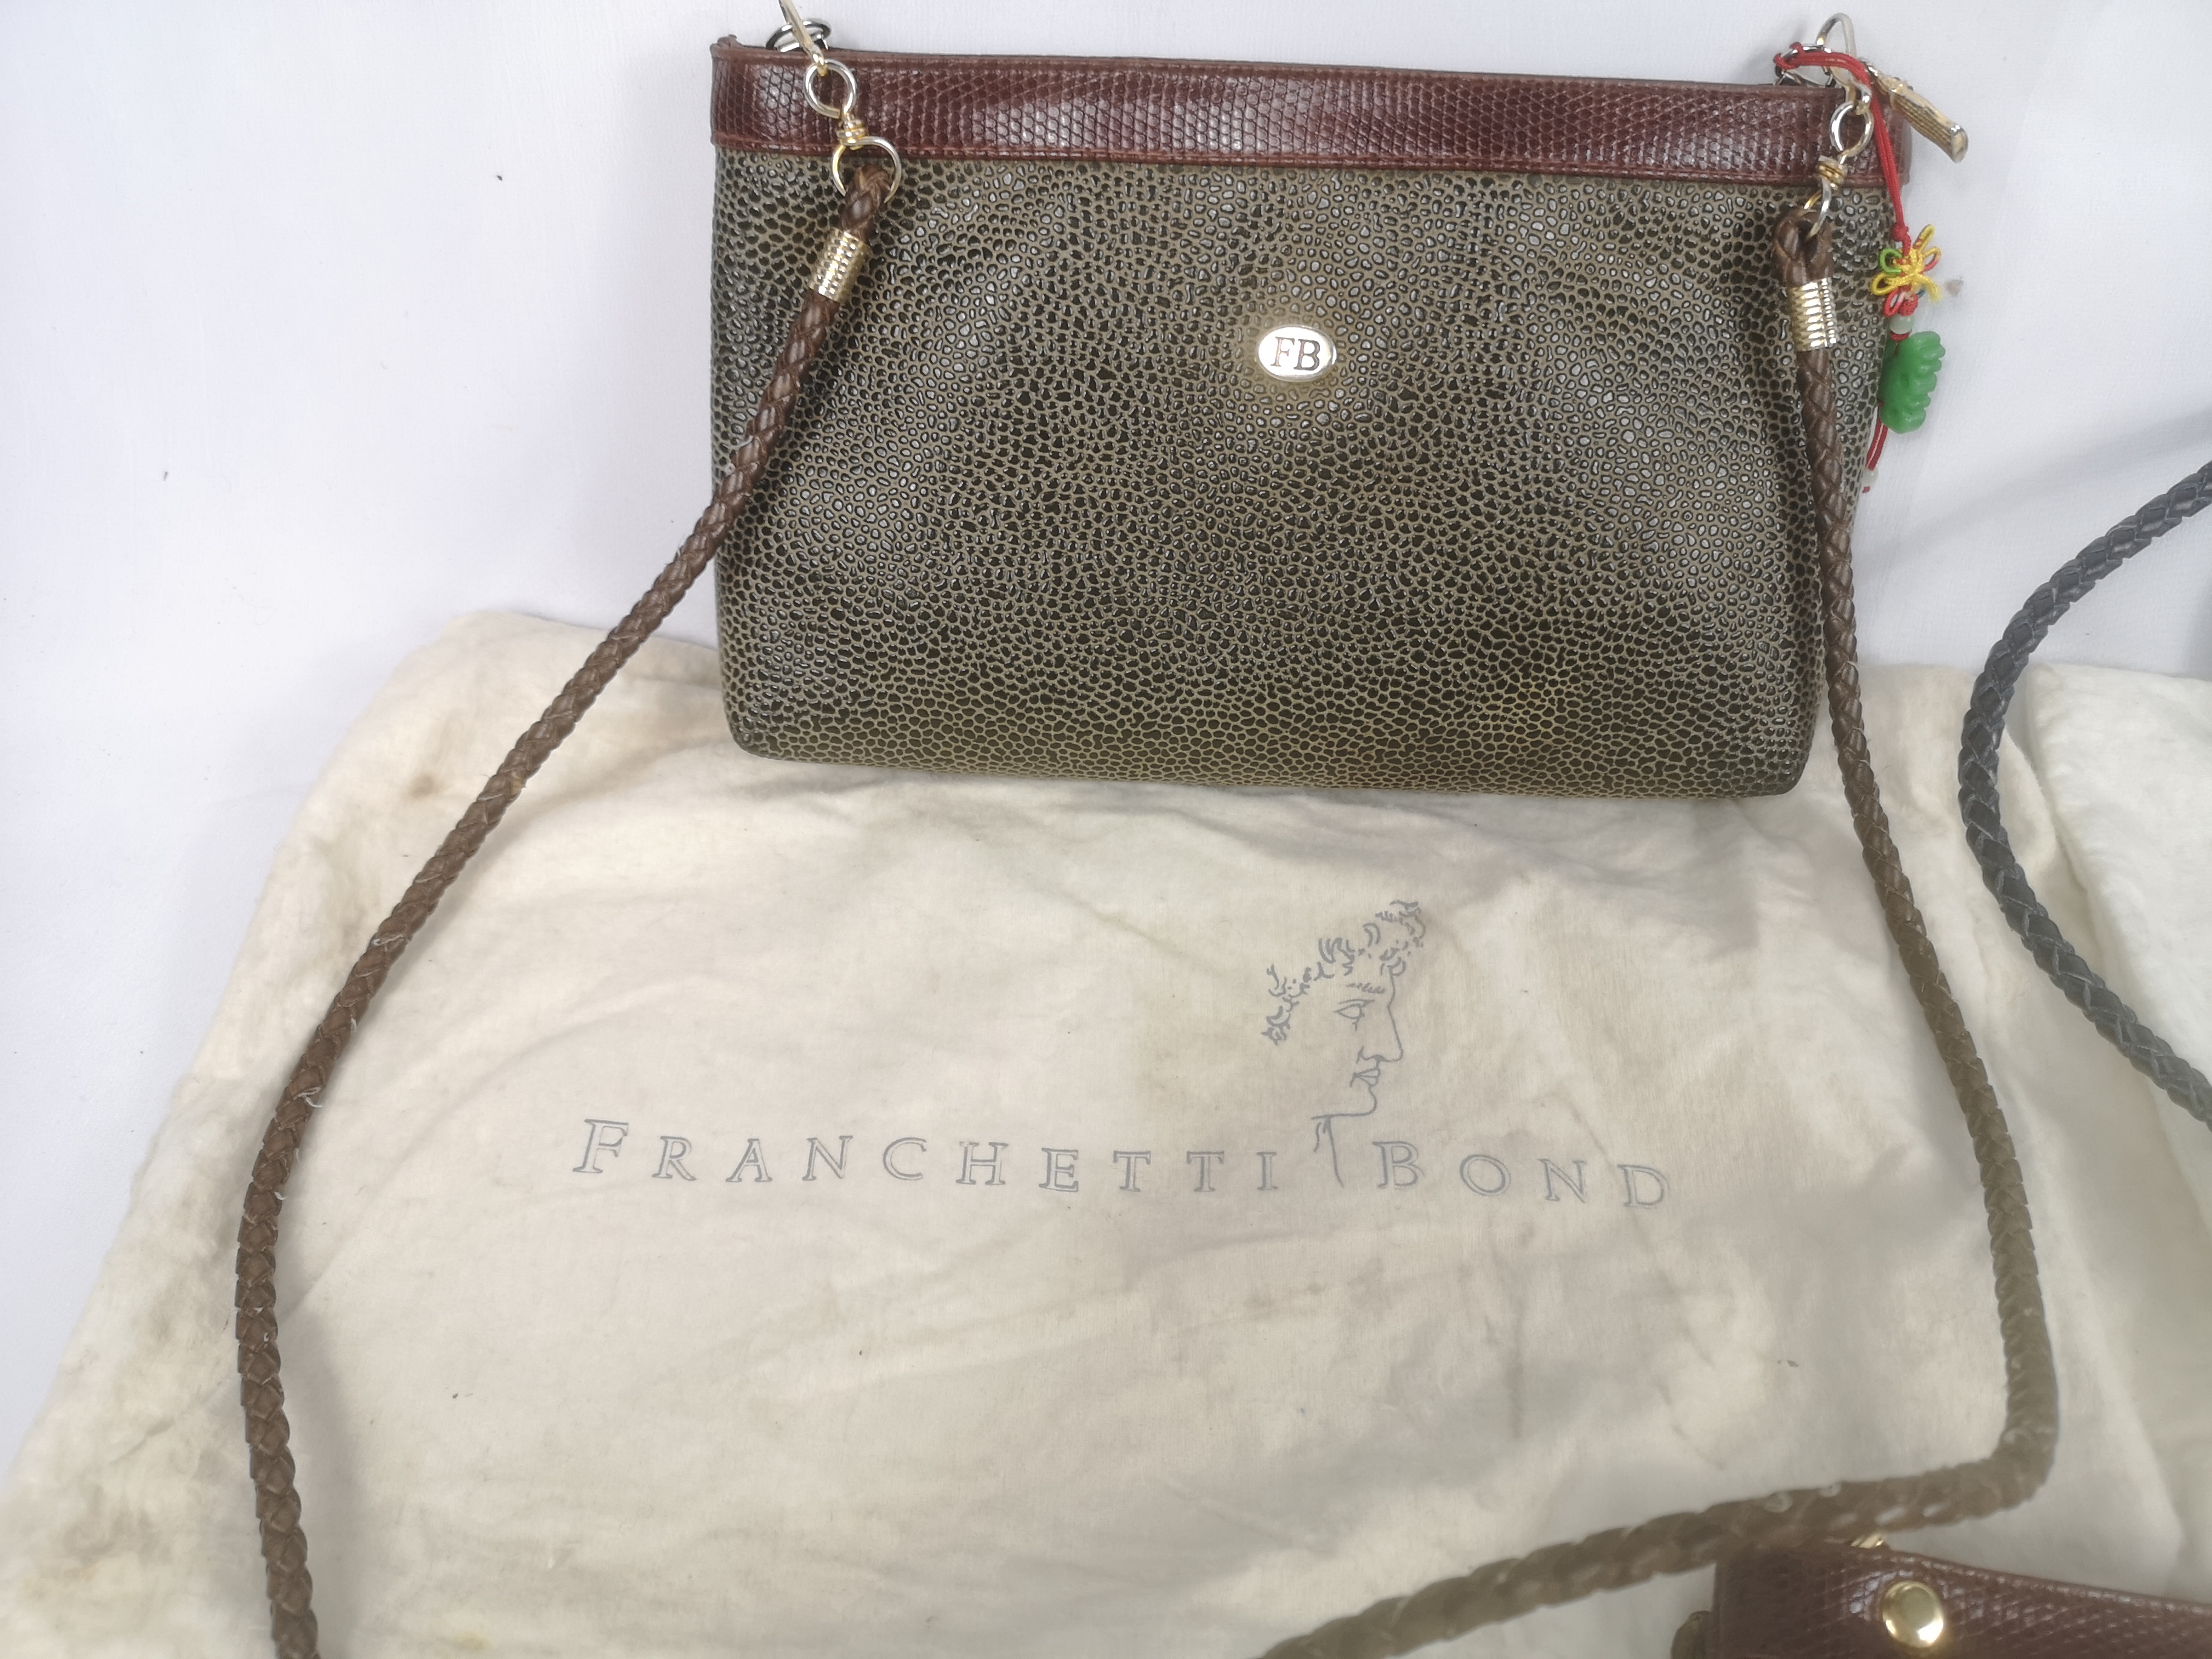 Two Franchetti Bond shoulder bags and one other - Image 2 of 7